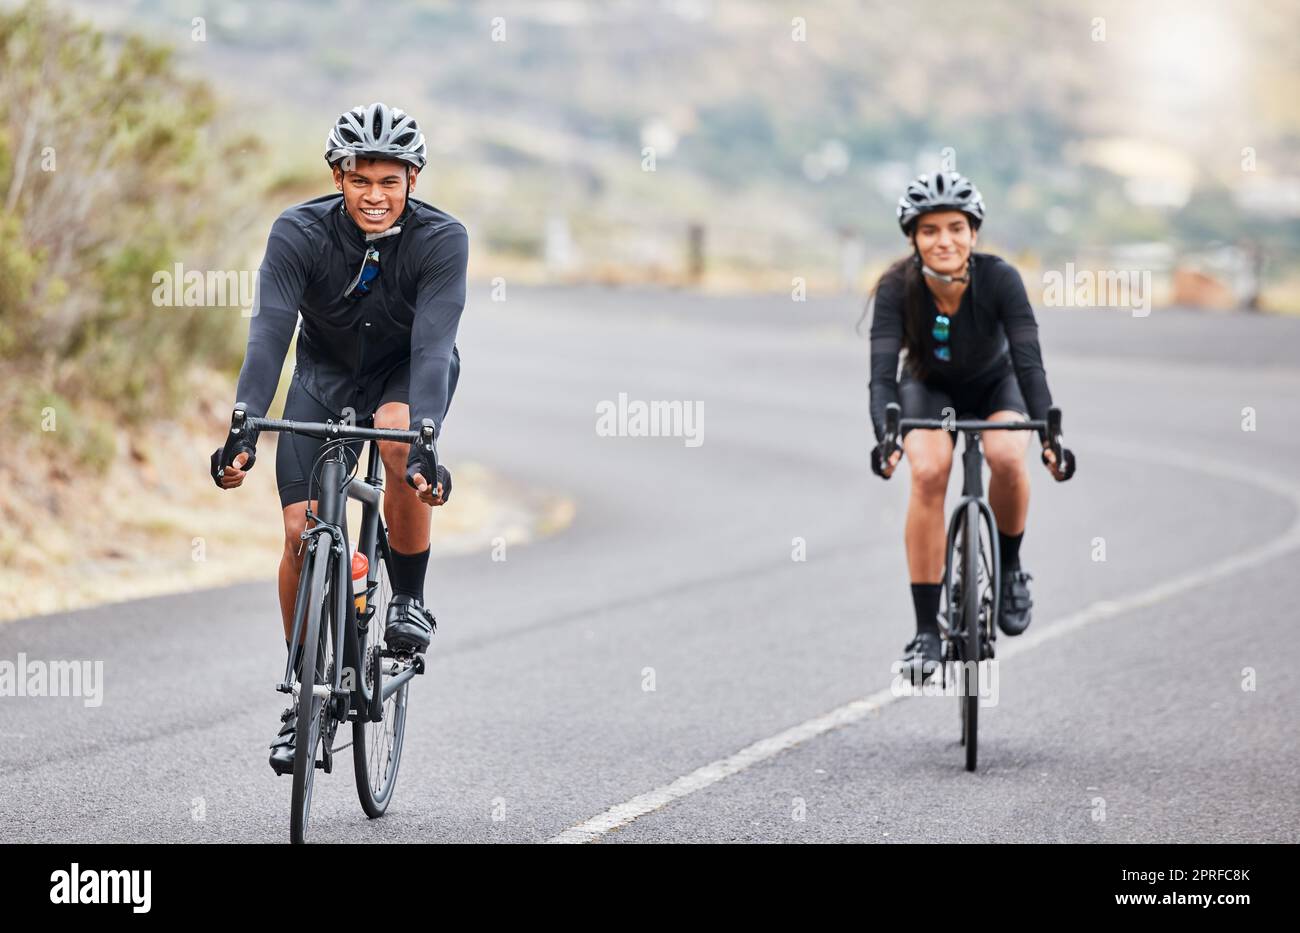 Cycling, couple goals and fitness while riding bicycle on countryside road for health and exercise. Happy male and female cyclists and athletes looking happy while training for sports race or hobby Stock Photo